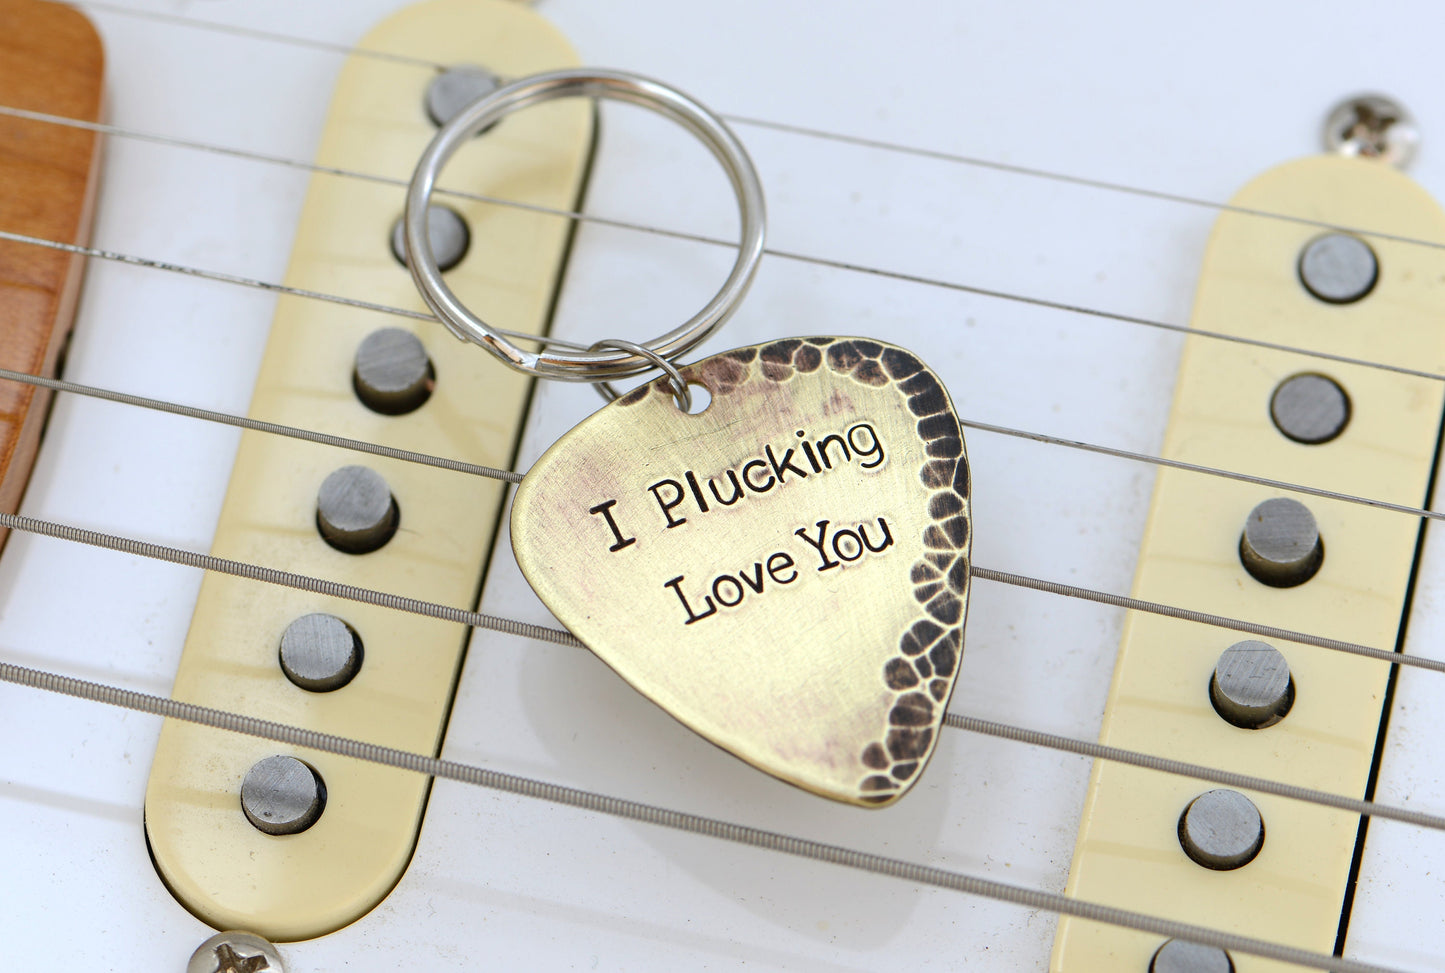 I plucking love you keychain in rustic brass with hammered finish